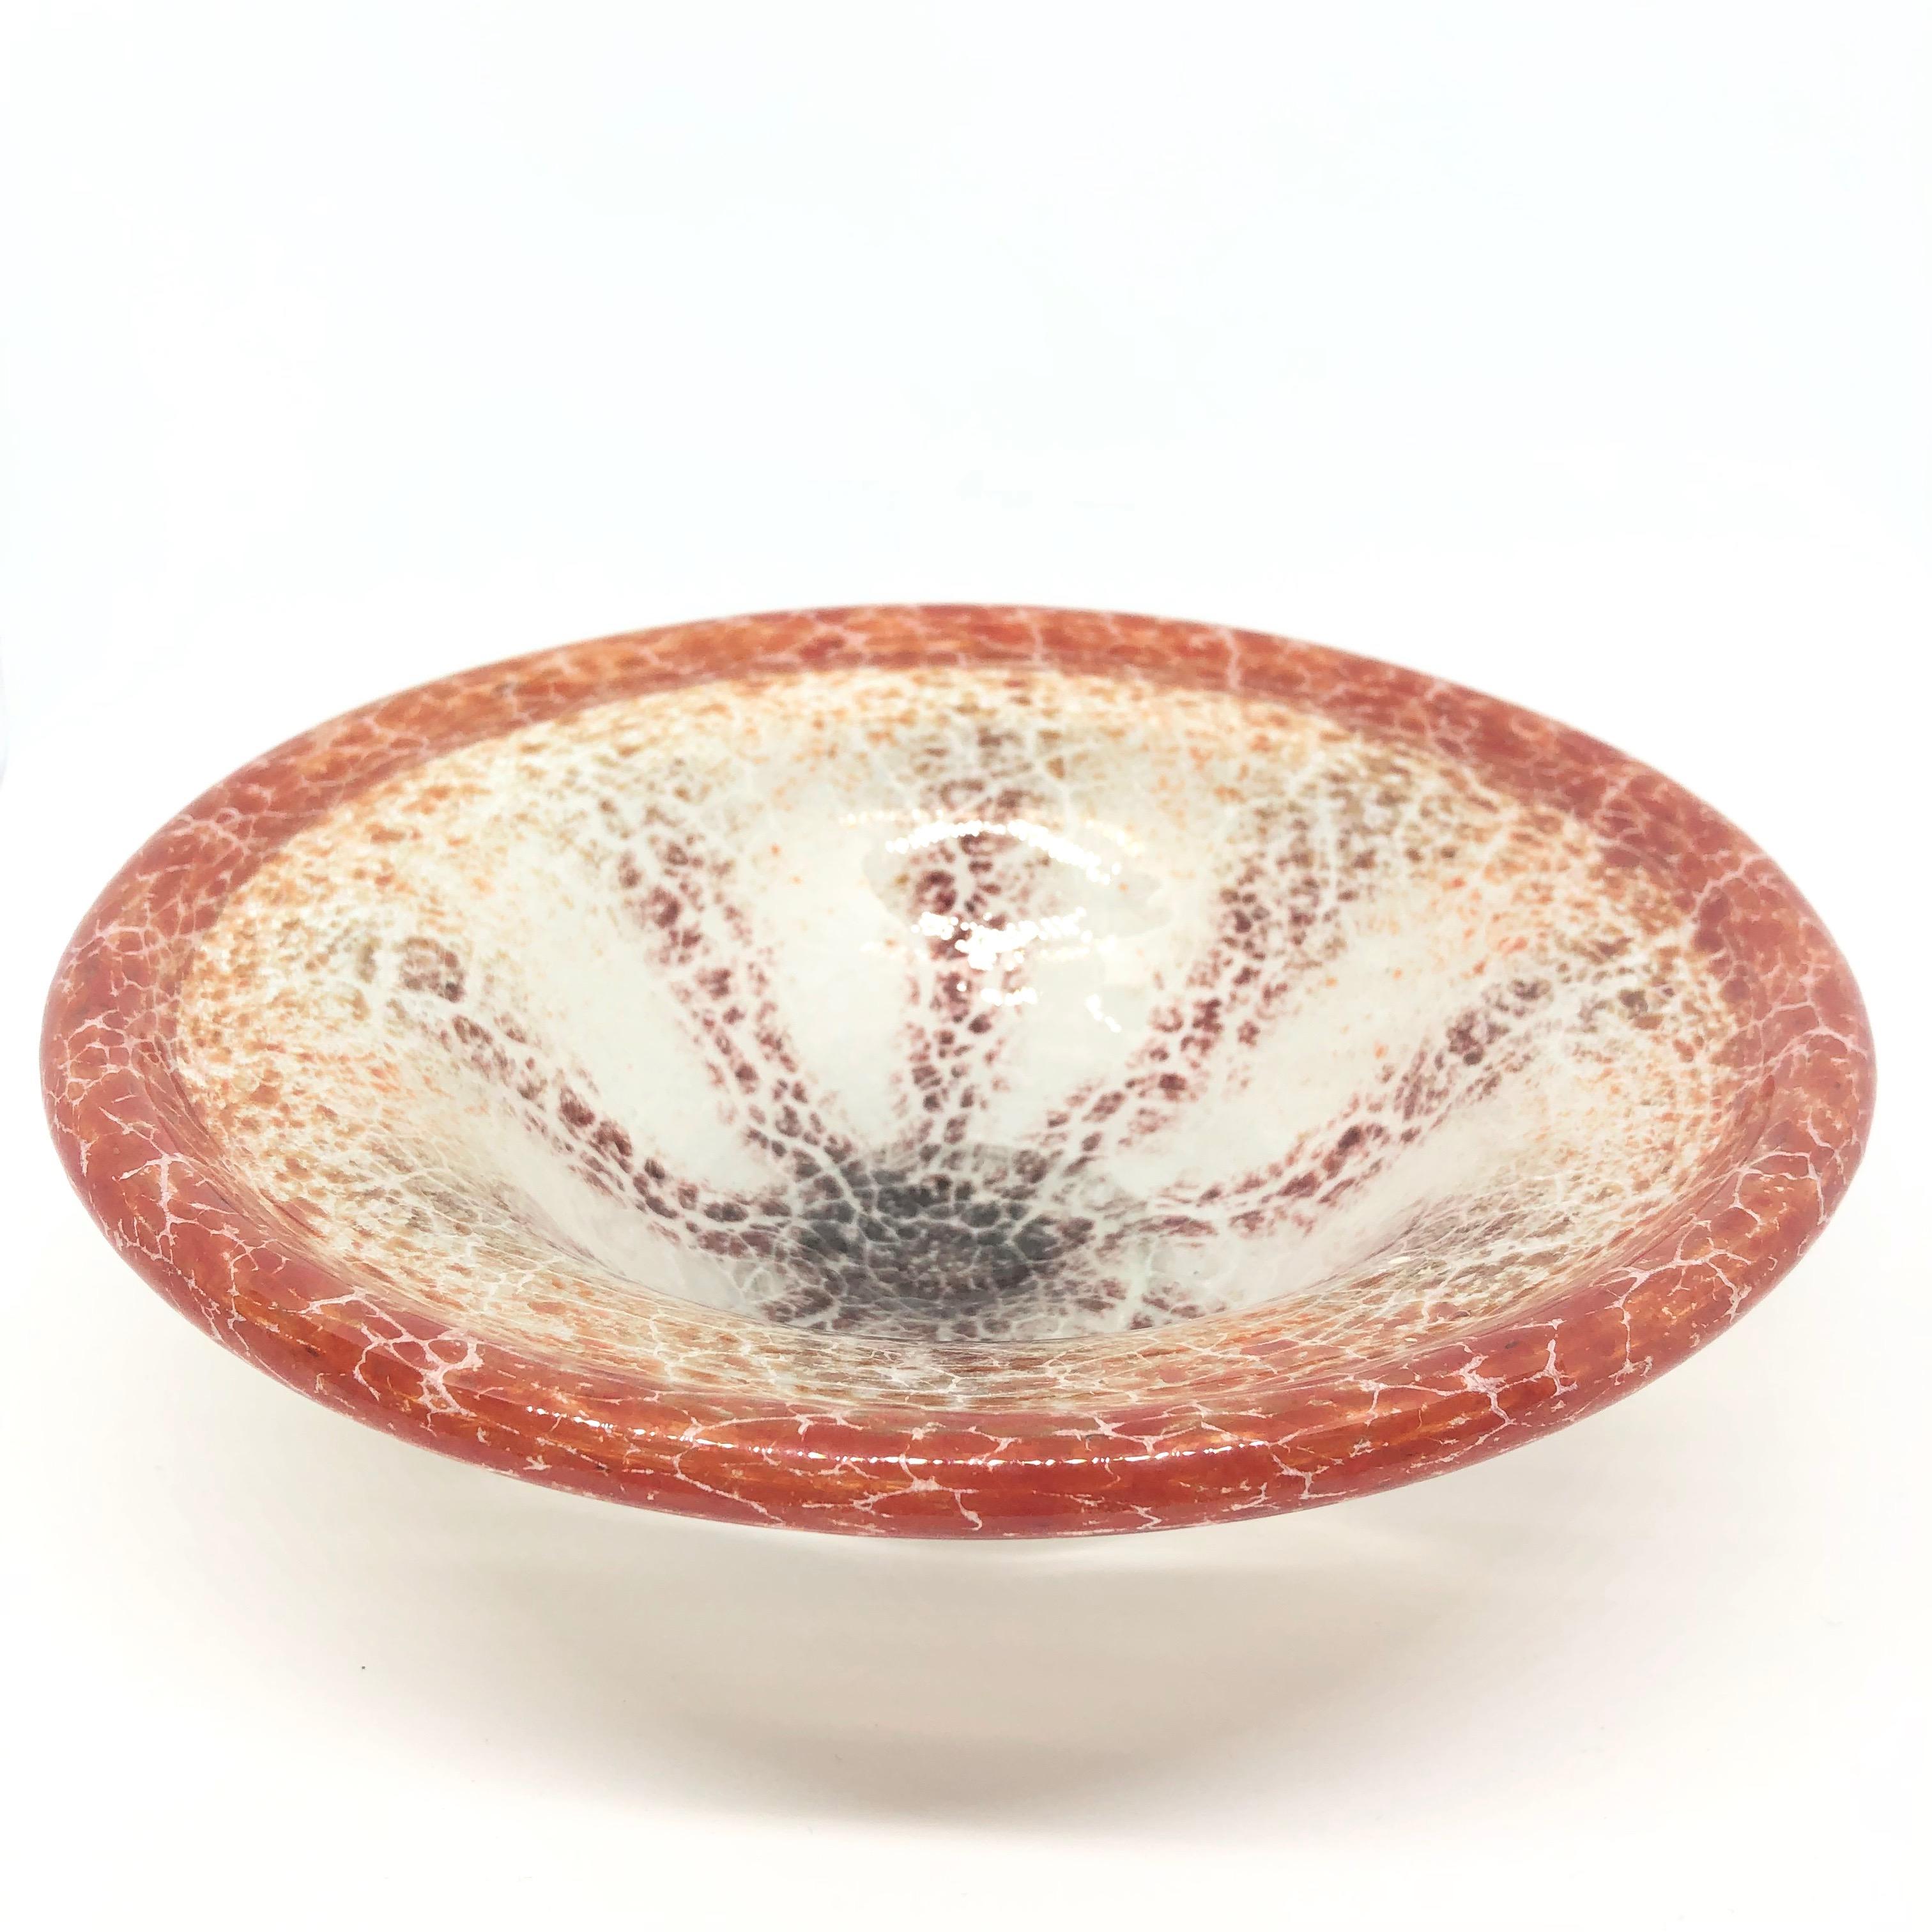 An amazing WMF 'Ikora' crackled art glass bowl, by Karl Wiedmann for WMF (Wurttembergische Metallwarenfabrik), 1930s Bauhaus Art Deco. It is made of glass with crackled details in red tones, raised on a foot. A highly decorative piece useful as